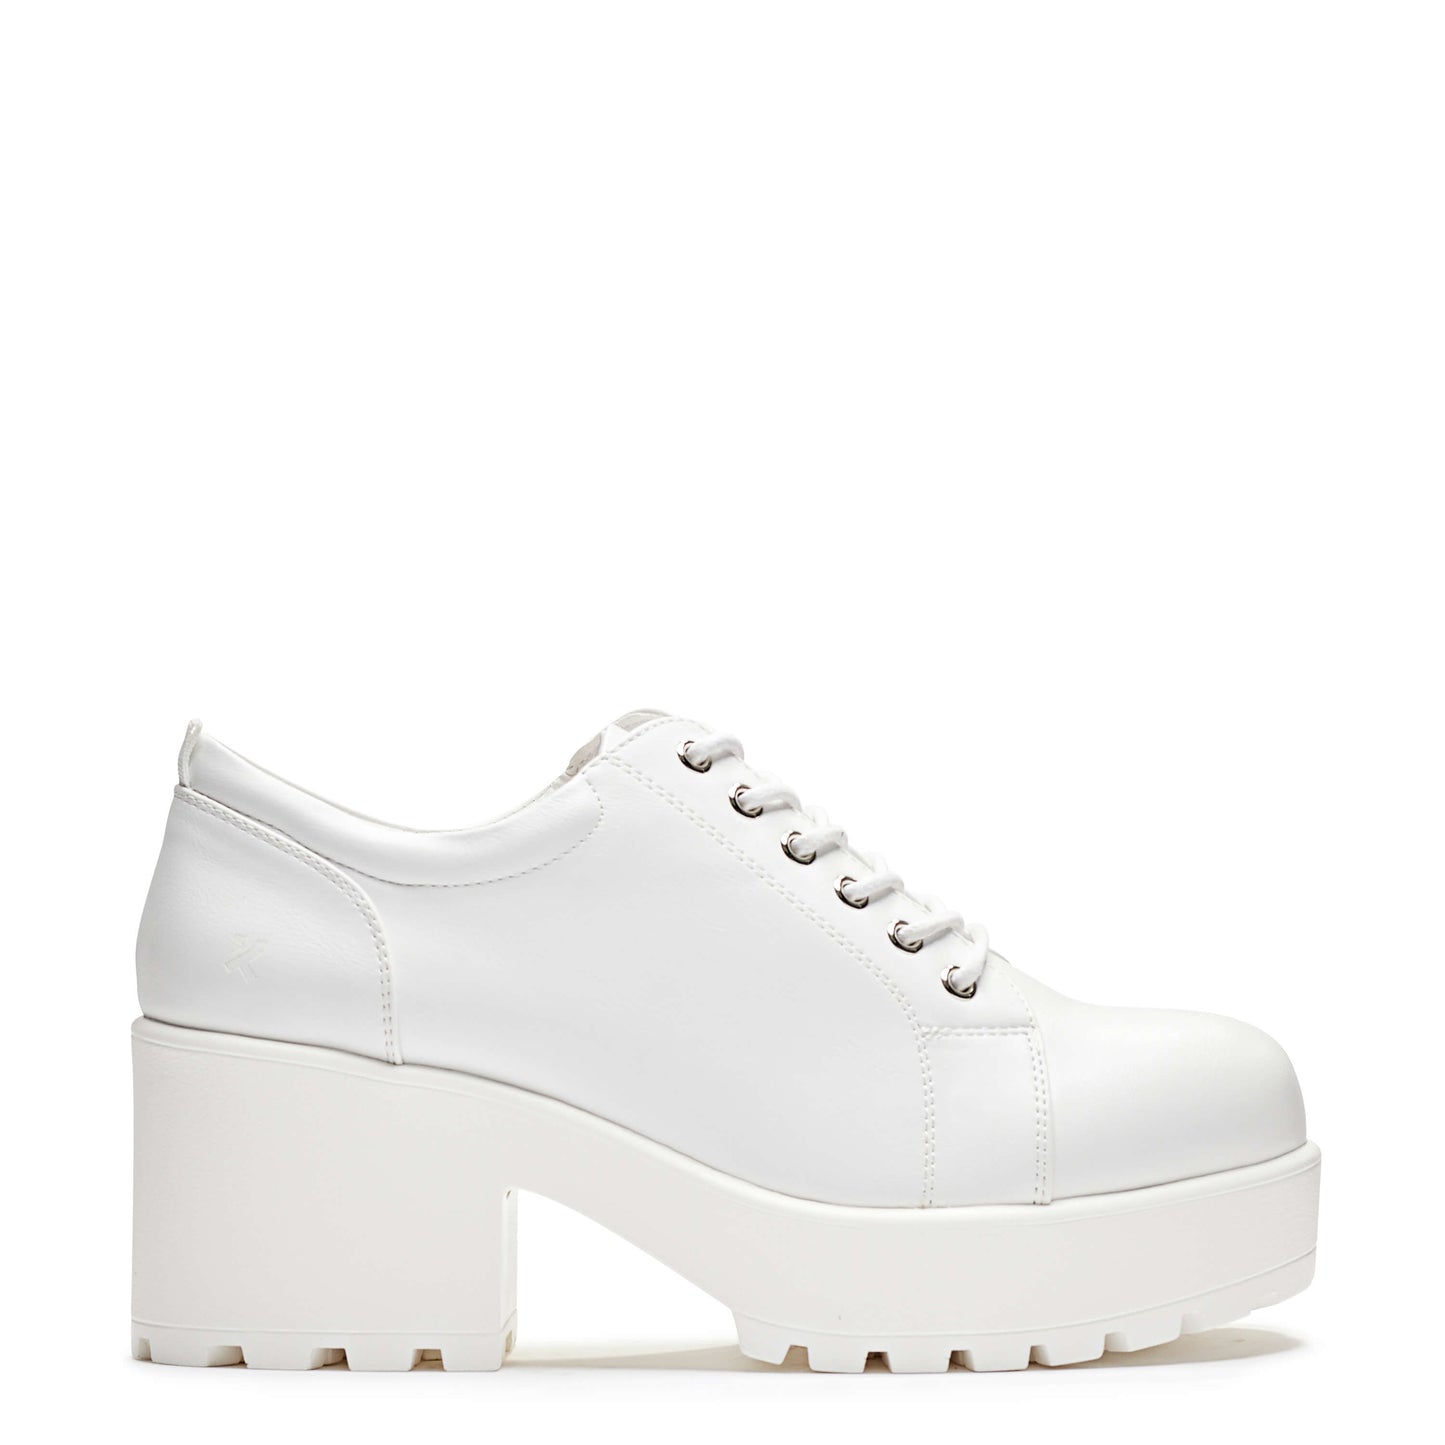 Rei Reloaded White Chunky Shoes - Shoes - KOI Footwear - White - Side View